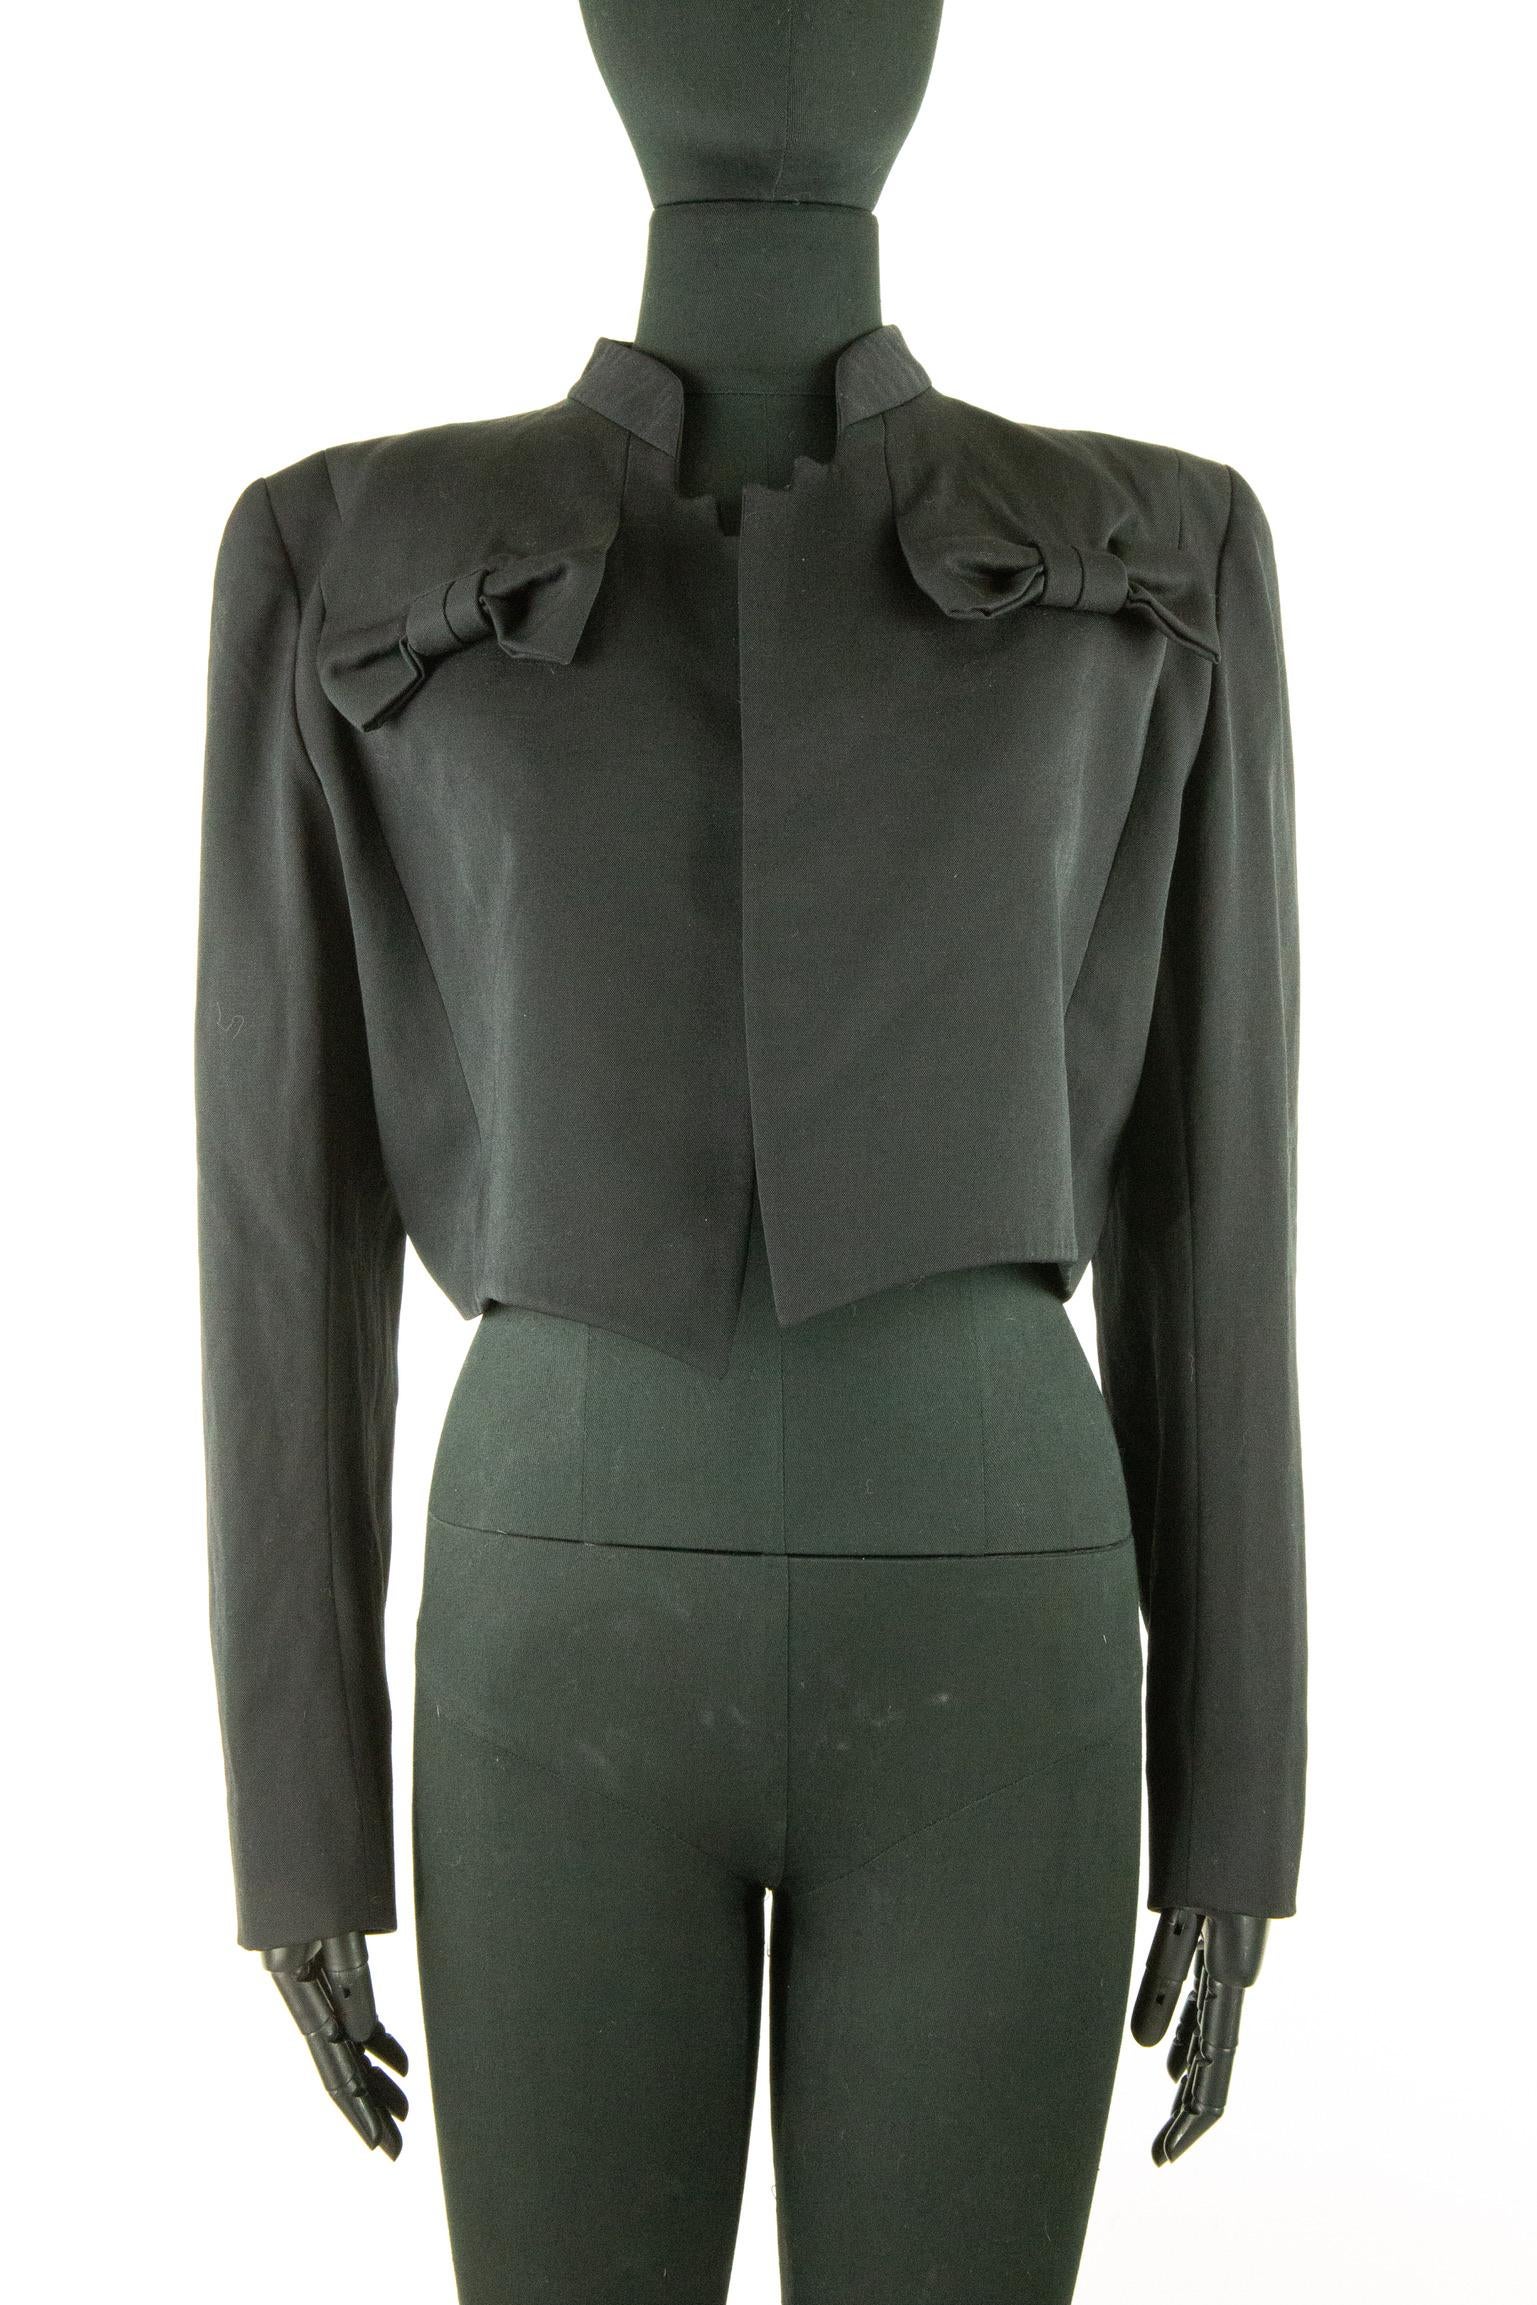 John Galliano For Givenchy Couture A/W 96 Jacket And Jumpsuit For Sale 6